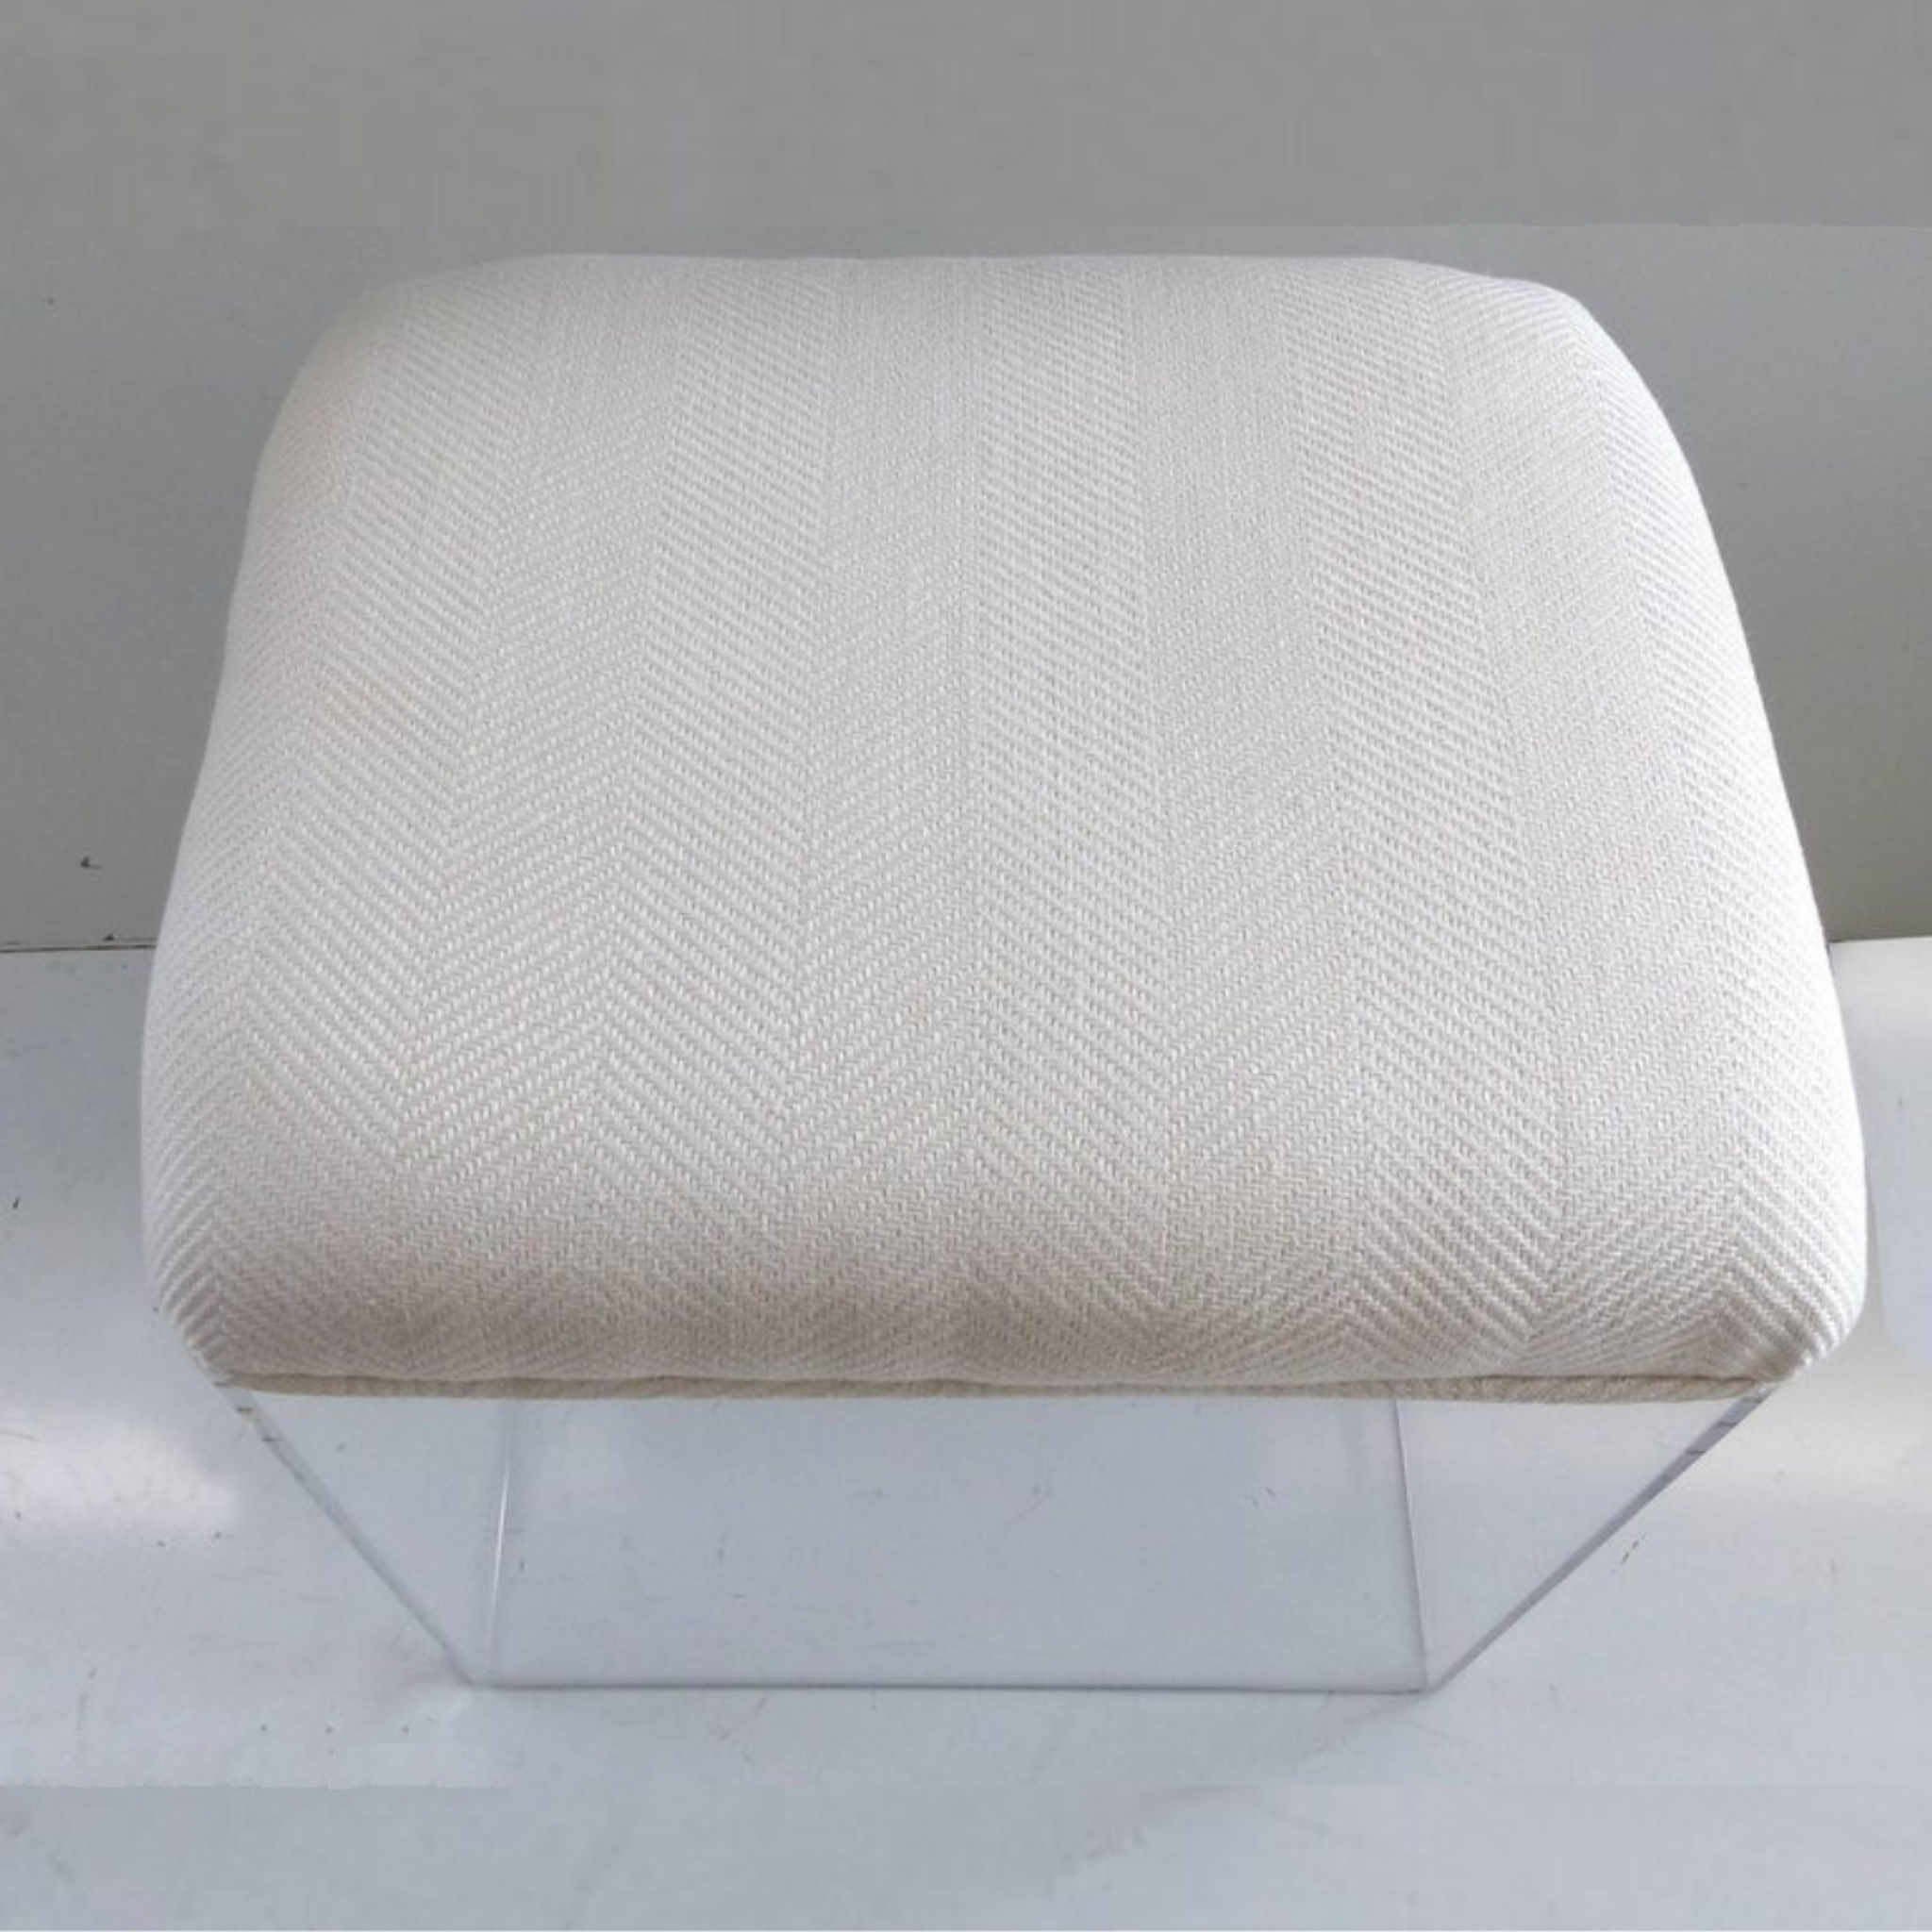 Lucite Cube Ottoman with Rope Handles 